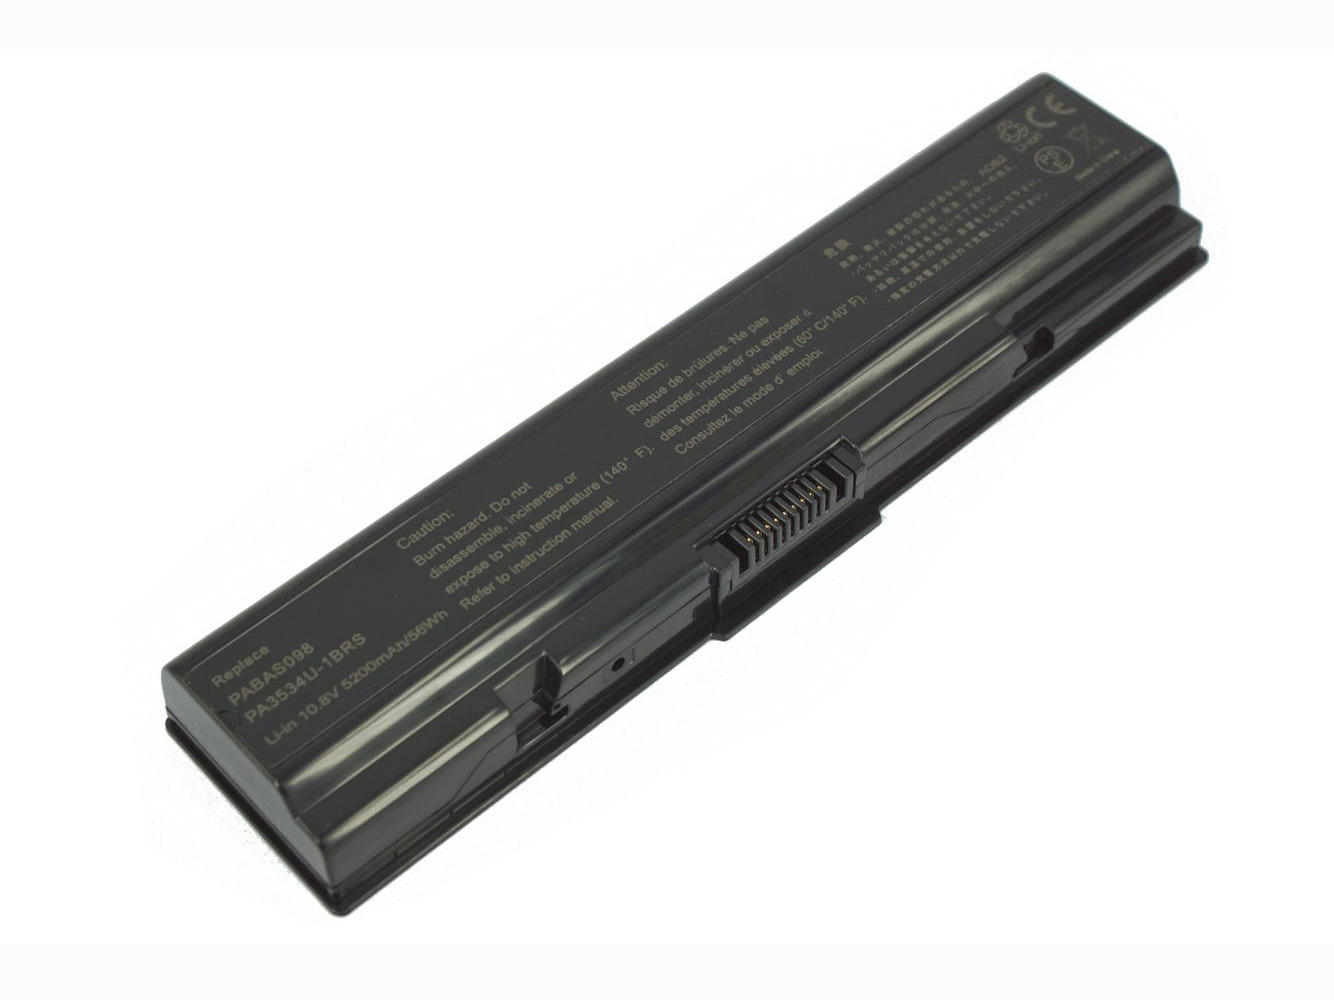 Toshiba Pa3533u-1bas, Pa3533u-1brs Laptop Batteries For Dynabook Ax/52e, Dynabook Ax/52f replacement